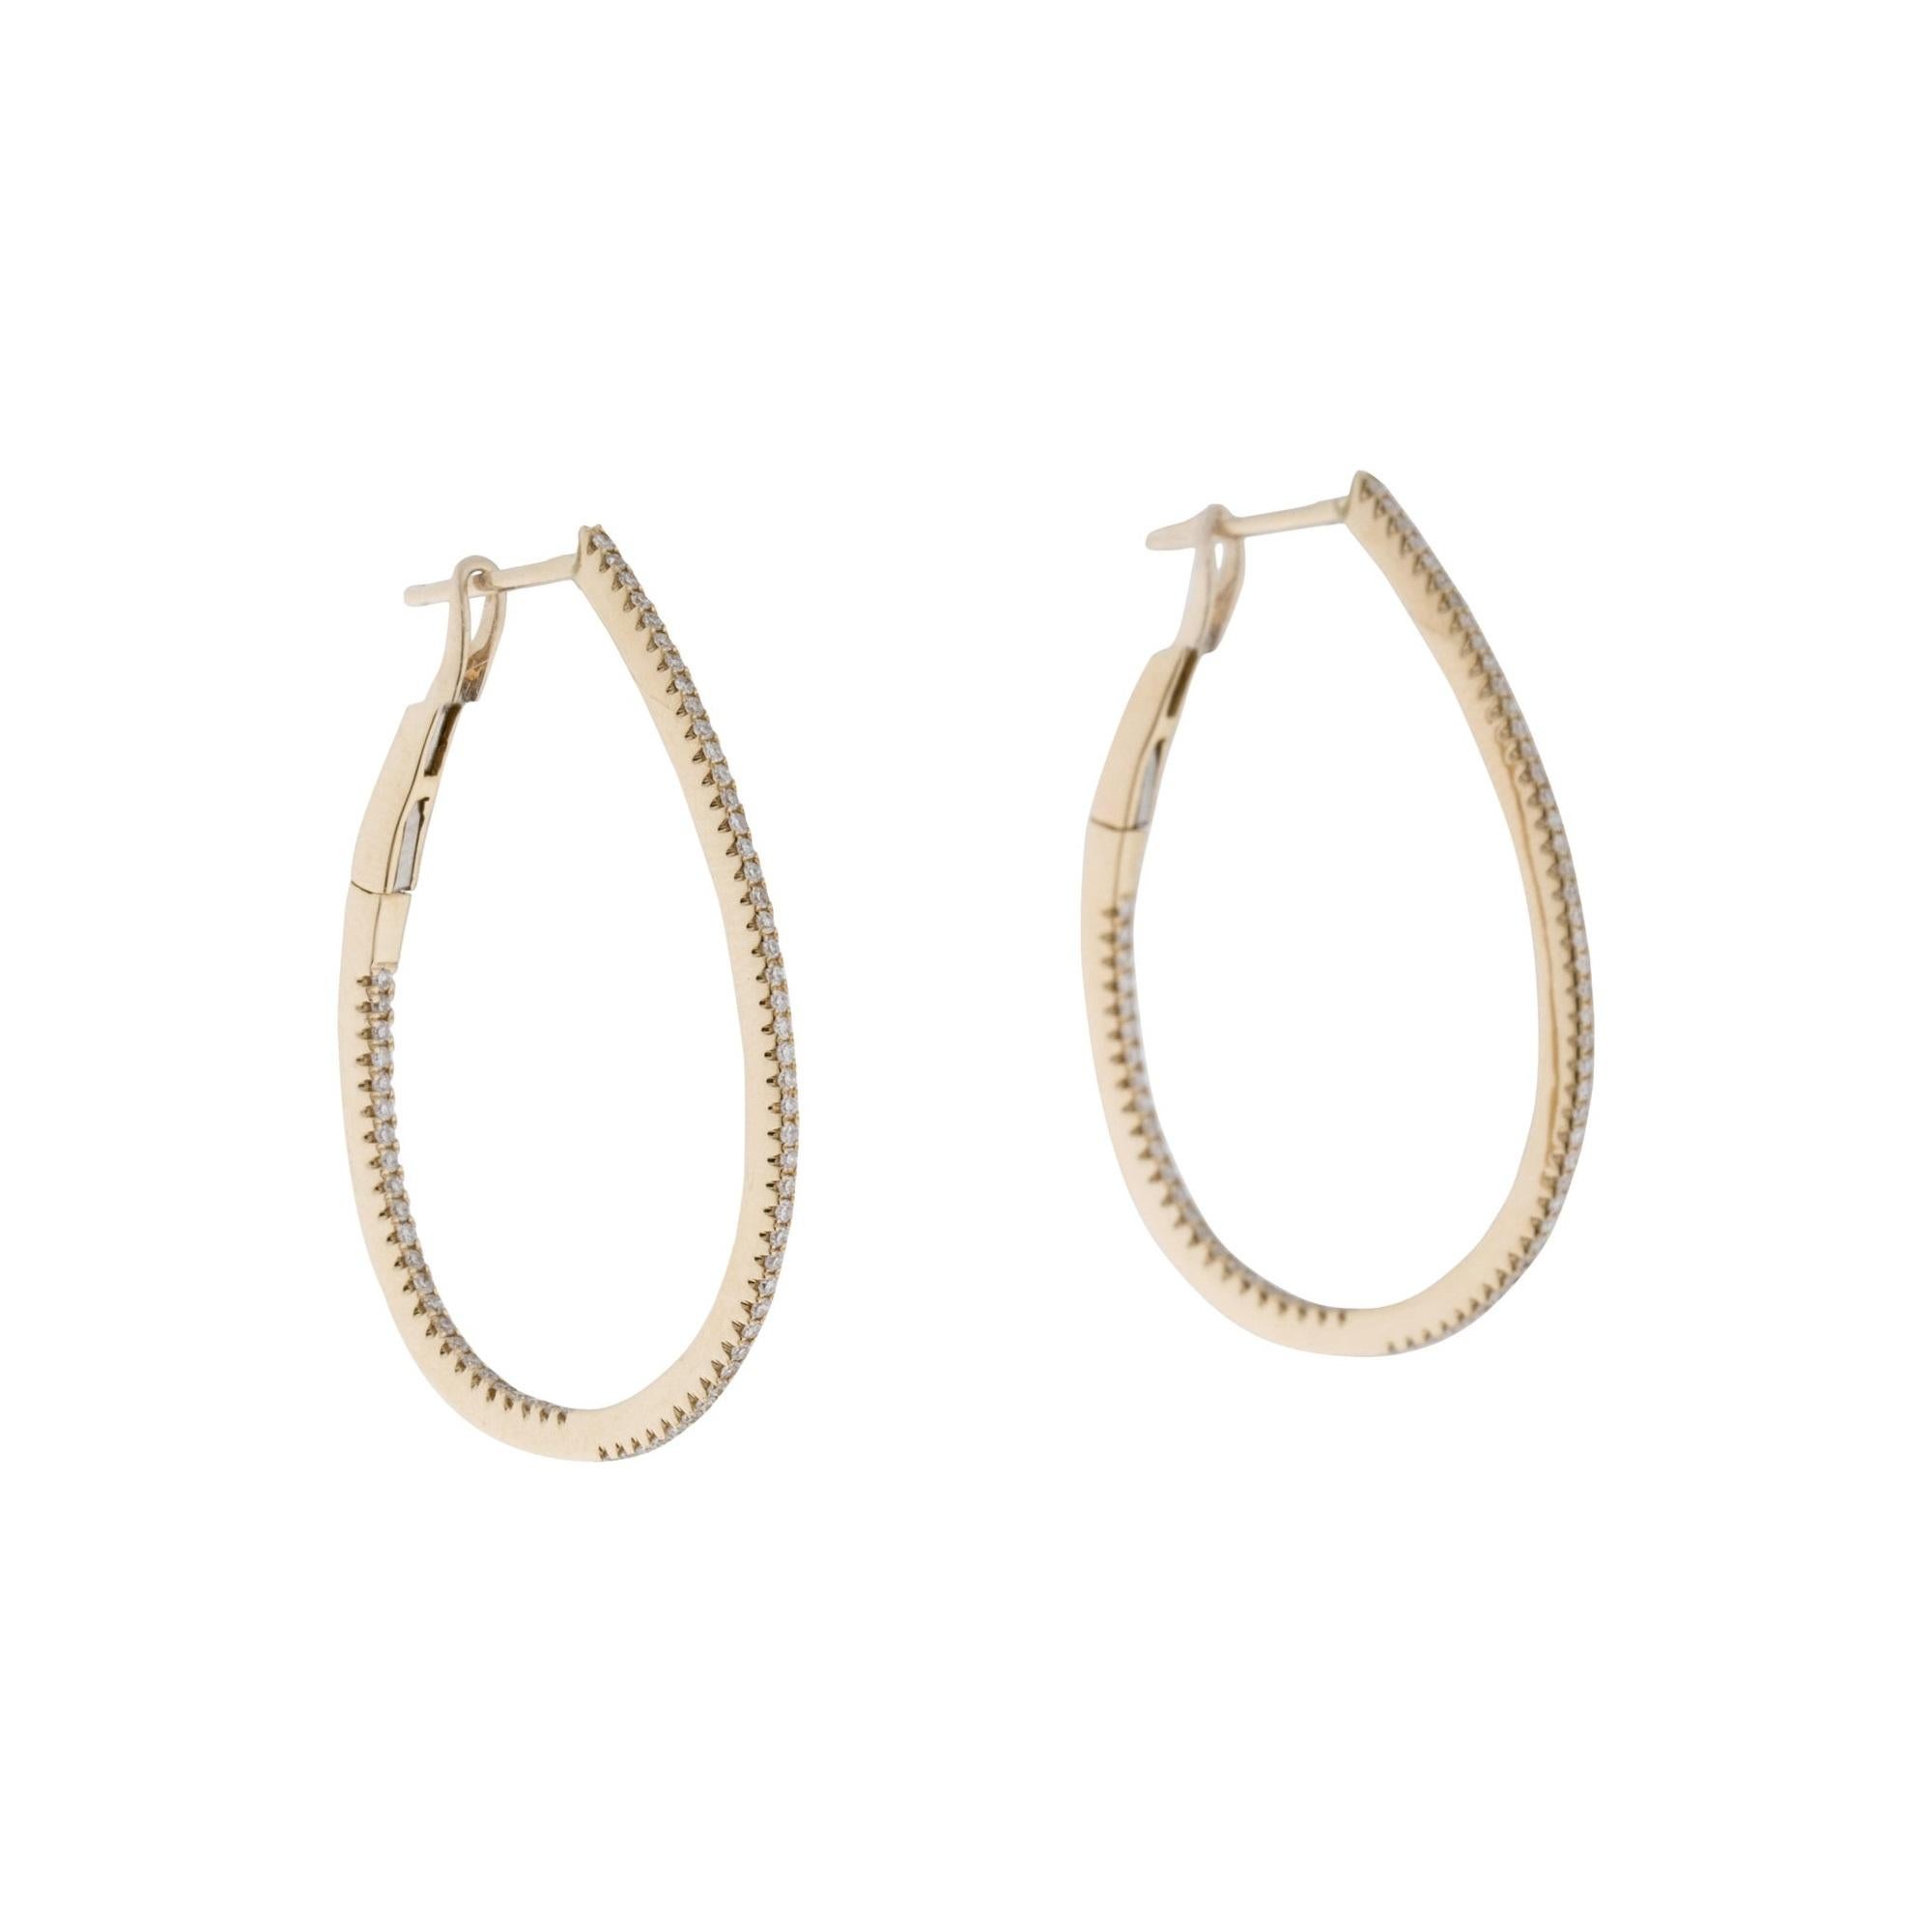 Set your lobes aglow in the classic shimmer and shine of these luxurious pear shape skinny hoop earrings! A dazzling array of diamonds fire up and down the design crafted from 14k white or yellow gold. Lever backs offer easy application so you can